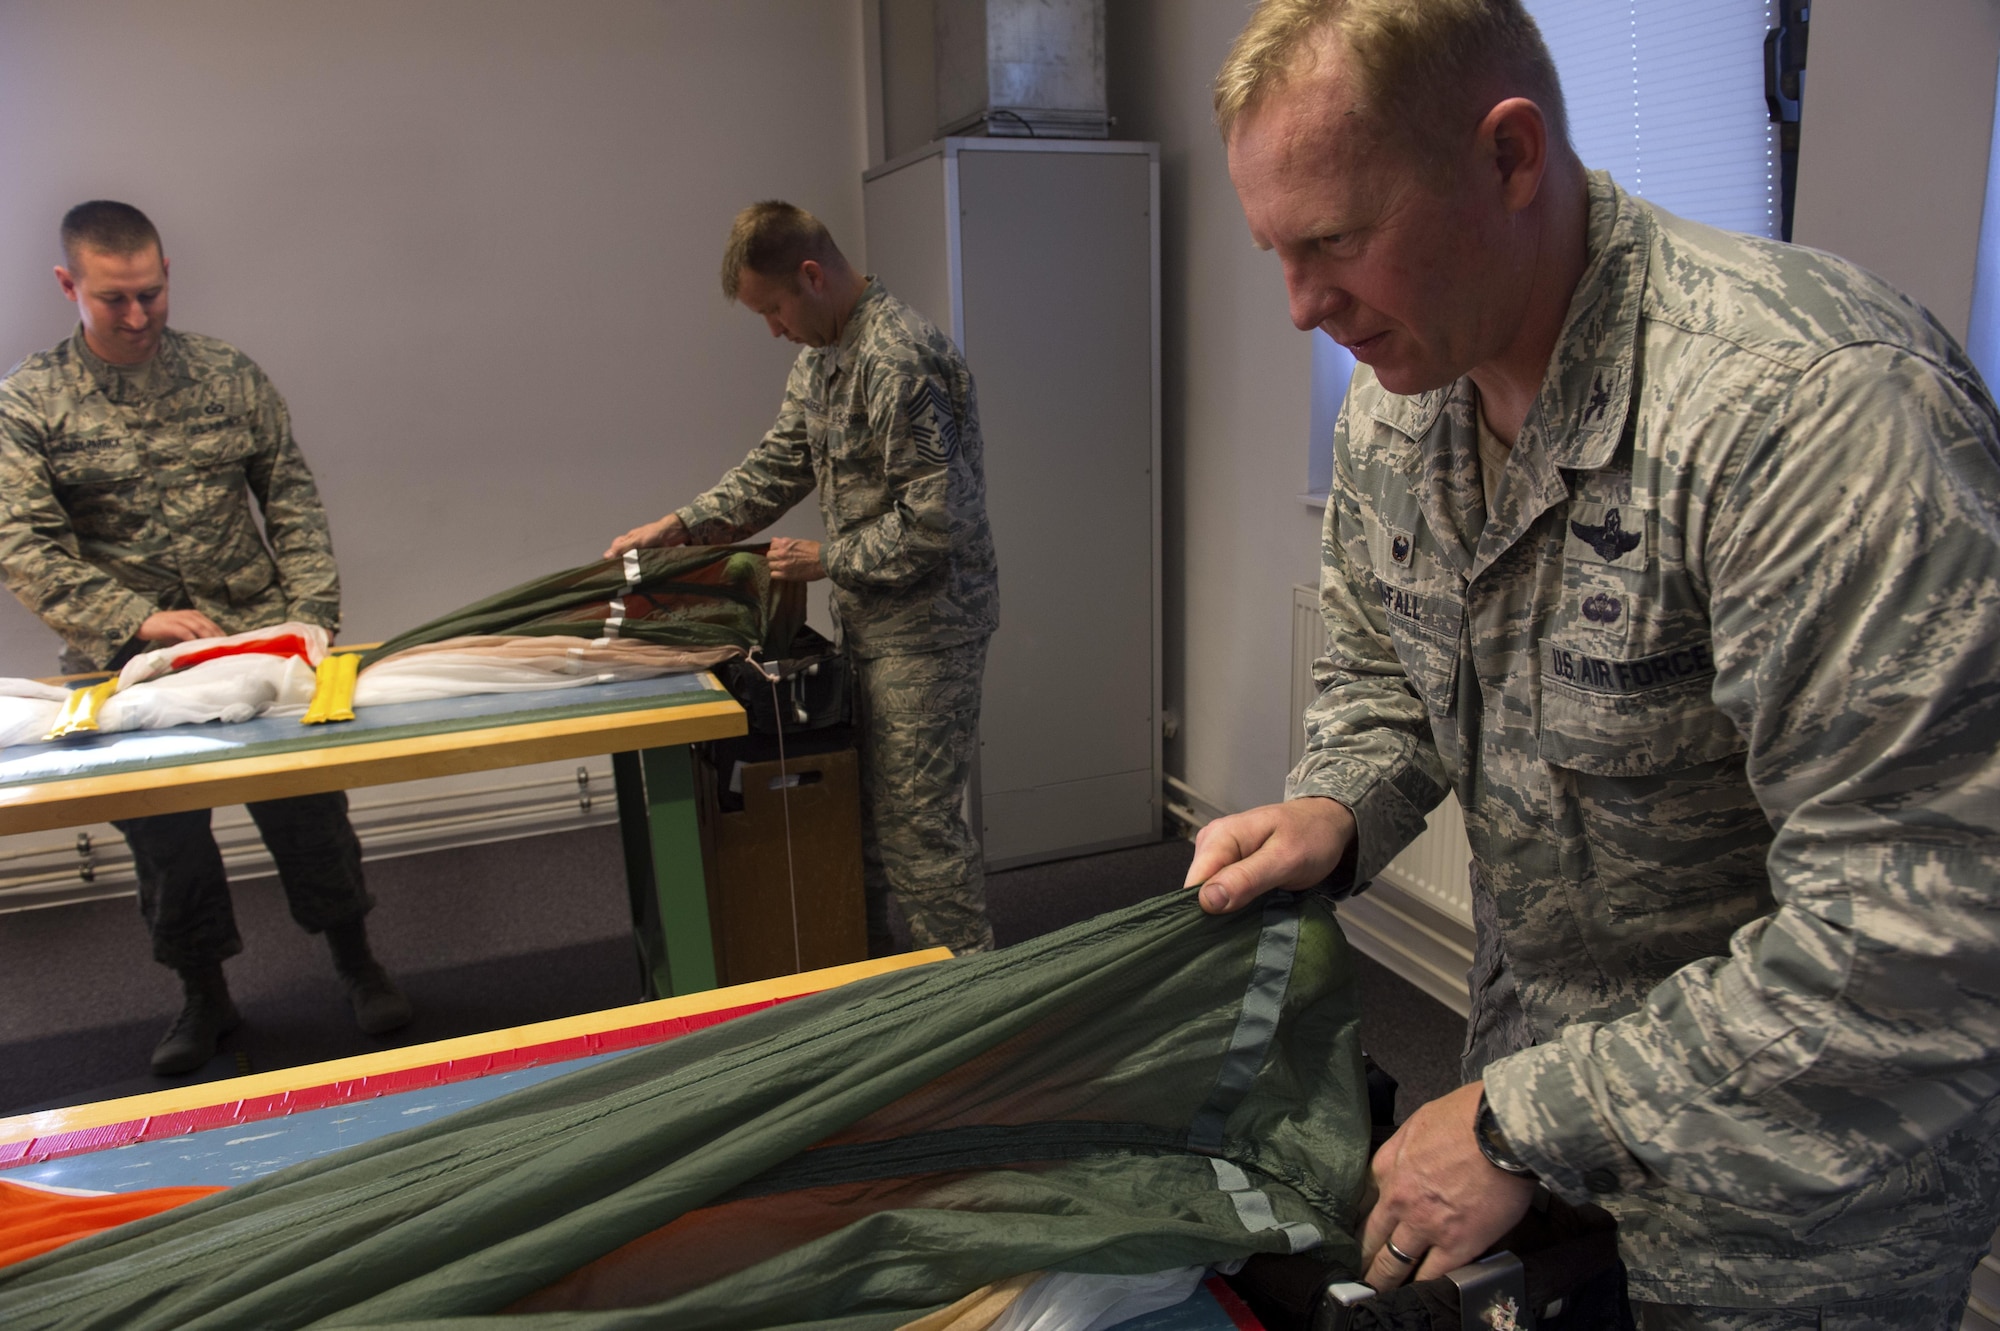 U.S. Air Force Col. Joseph McFall, 52nd Fighter Wing commander, center, and Chief Master Sgt. Edwin Ludwigsen, 52nd Fighter Wing command chief, center left, pack training parachutes during a Saber leadership “out and about” at the parachute shop on Spangdahlem Air Base, Germany, Sept. 8, 2016. The event lets the 52nd FW commander and command chief get a hands on experience at Saber work centers in an effort to better understand the duties of Airmen at Spangdahlem. (U.S. Air Force photo by Airman 1st Class Preston Cherry/Released)